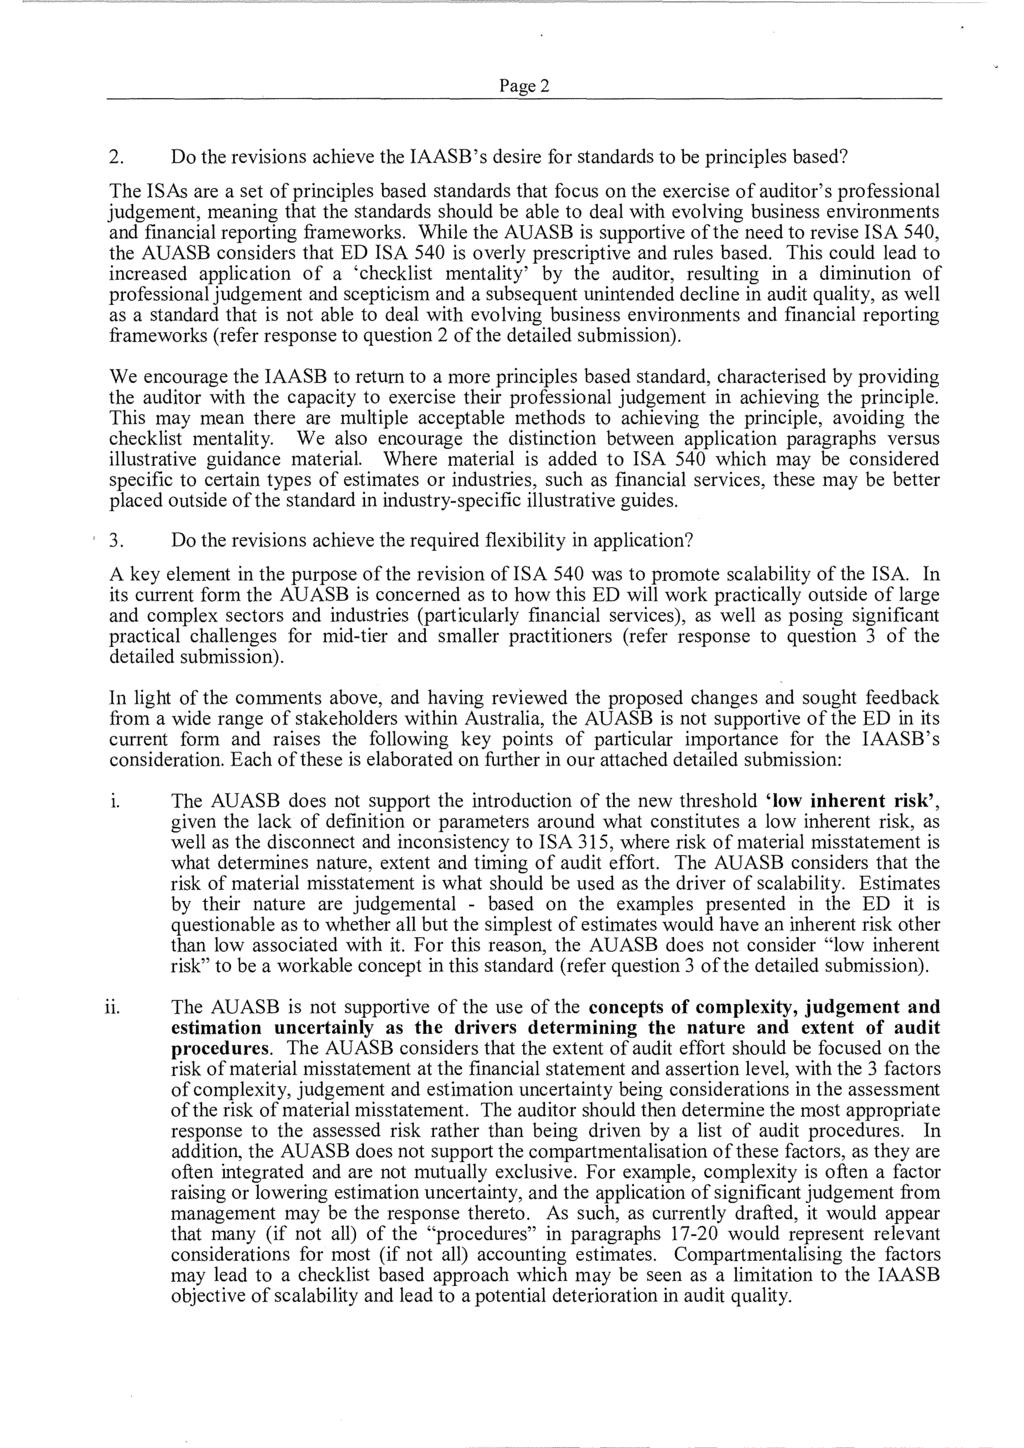 Page 2 2. Do the revisions achieve the IAASB's desire for standards to be principles based?